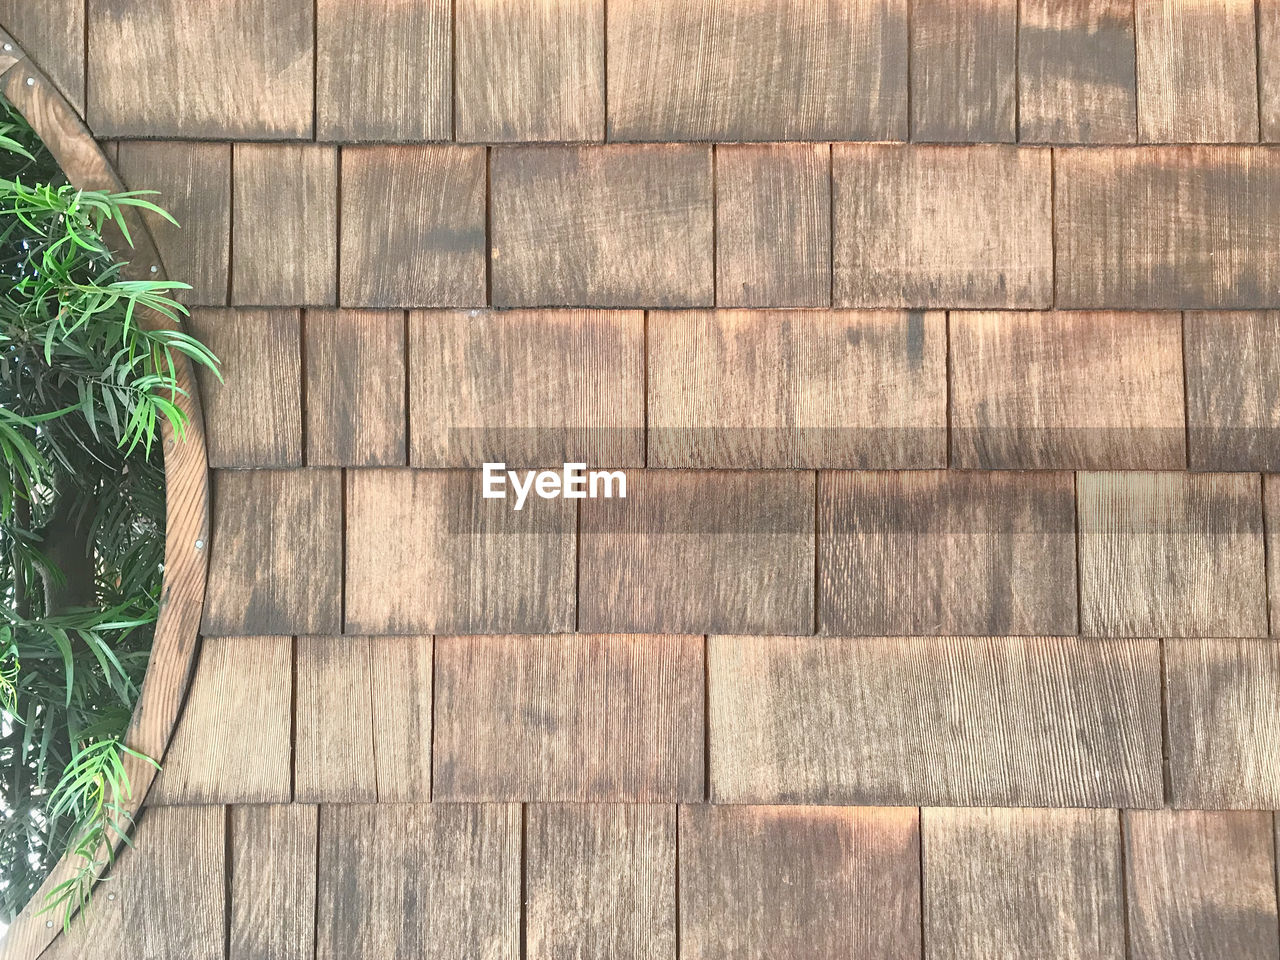 High angle view of wooden wall with plant container